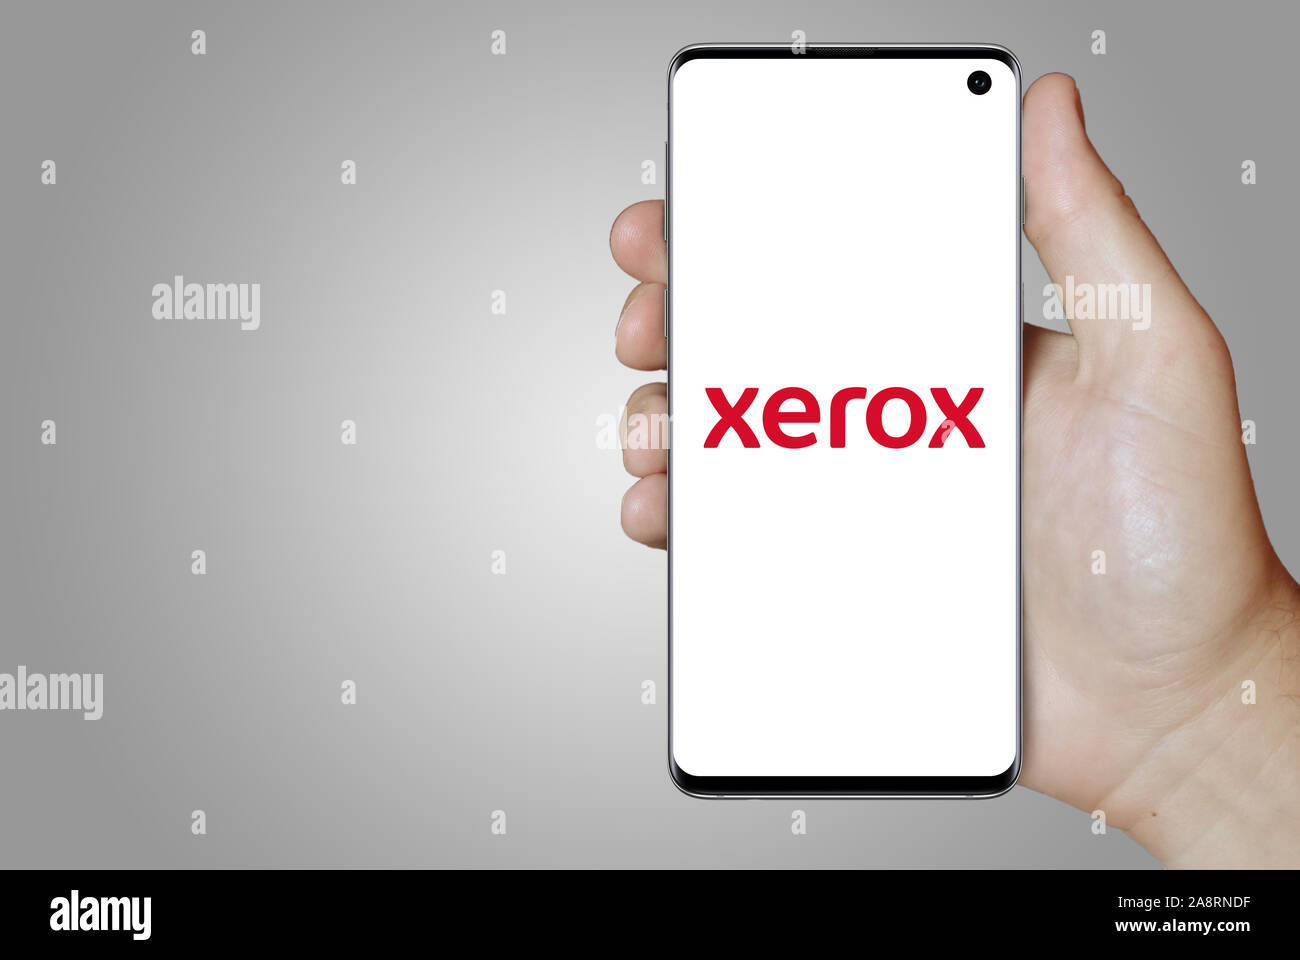 Logo of public company Xerox displayed on a smartphone. Grey background. Credit: PIXDUCE Stock Photo